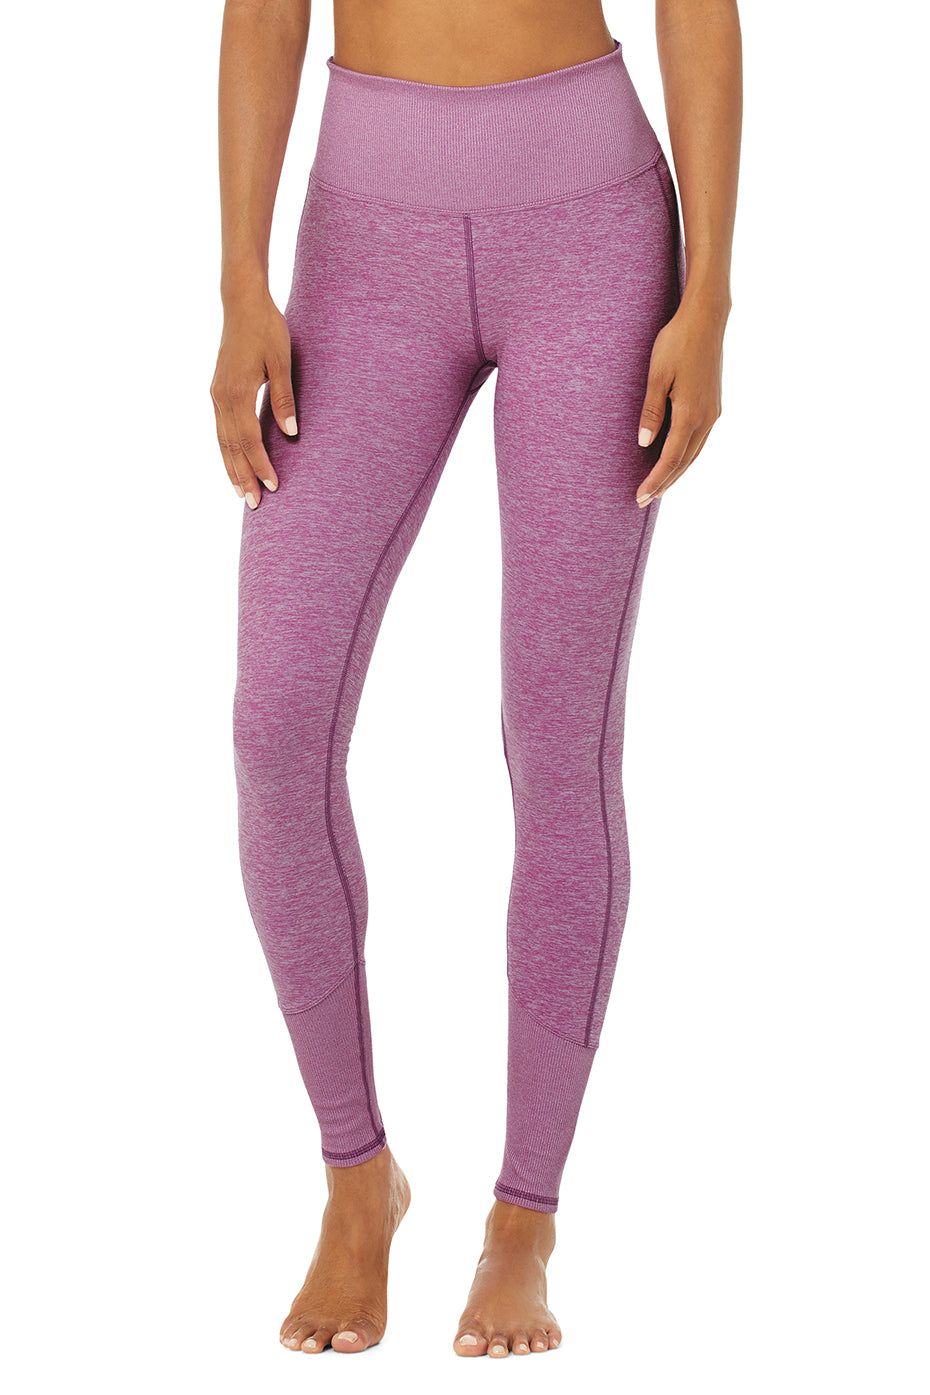 🌟 OMG SO MANY NEW LEGGINGS 🌟 - Alo Yoga Email Archive